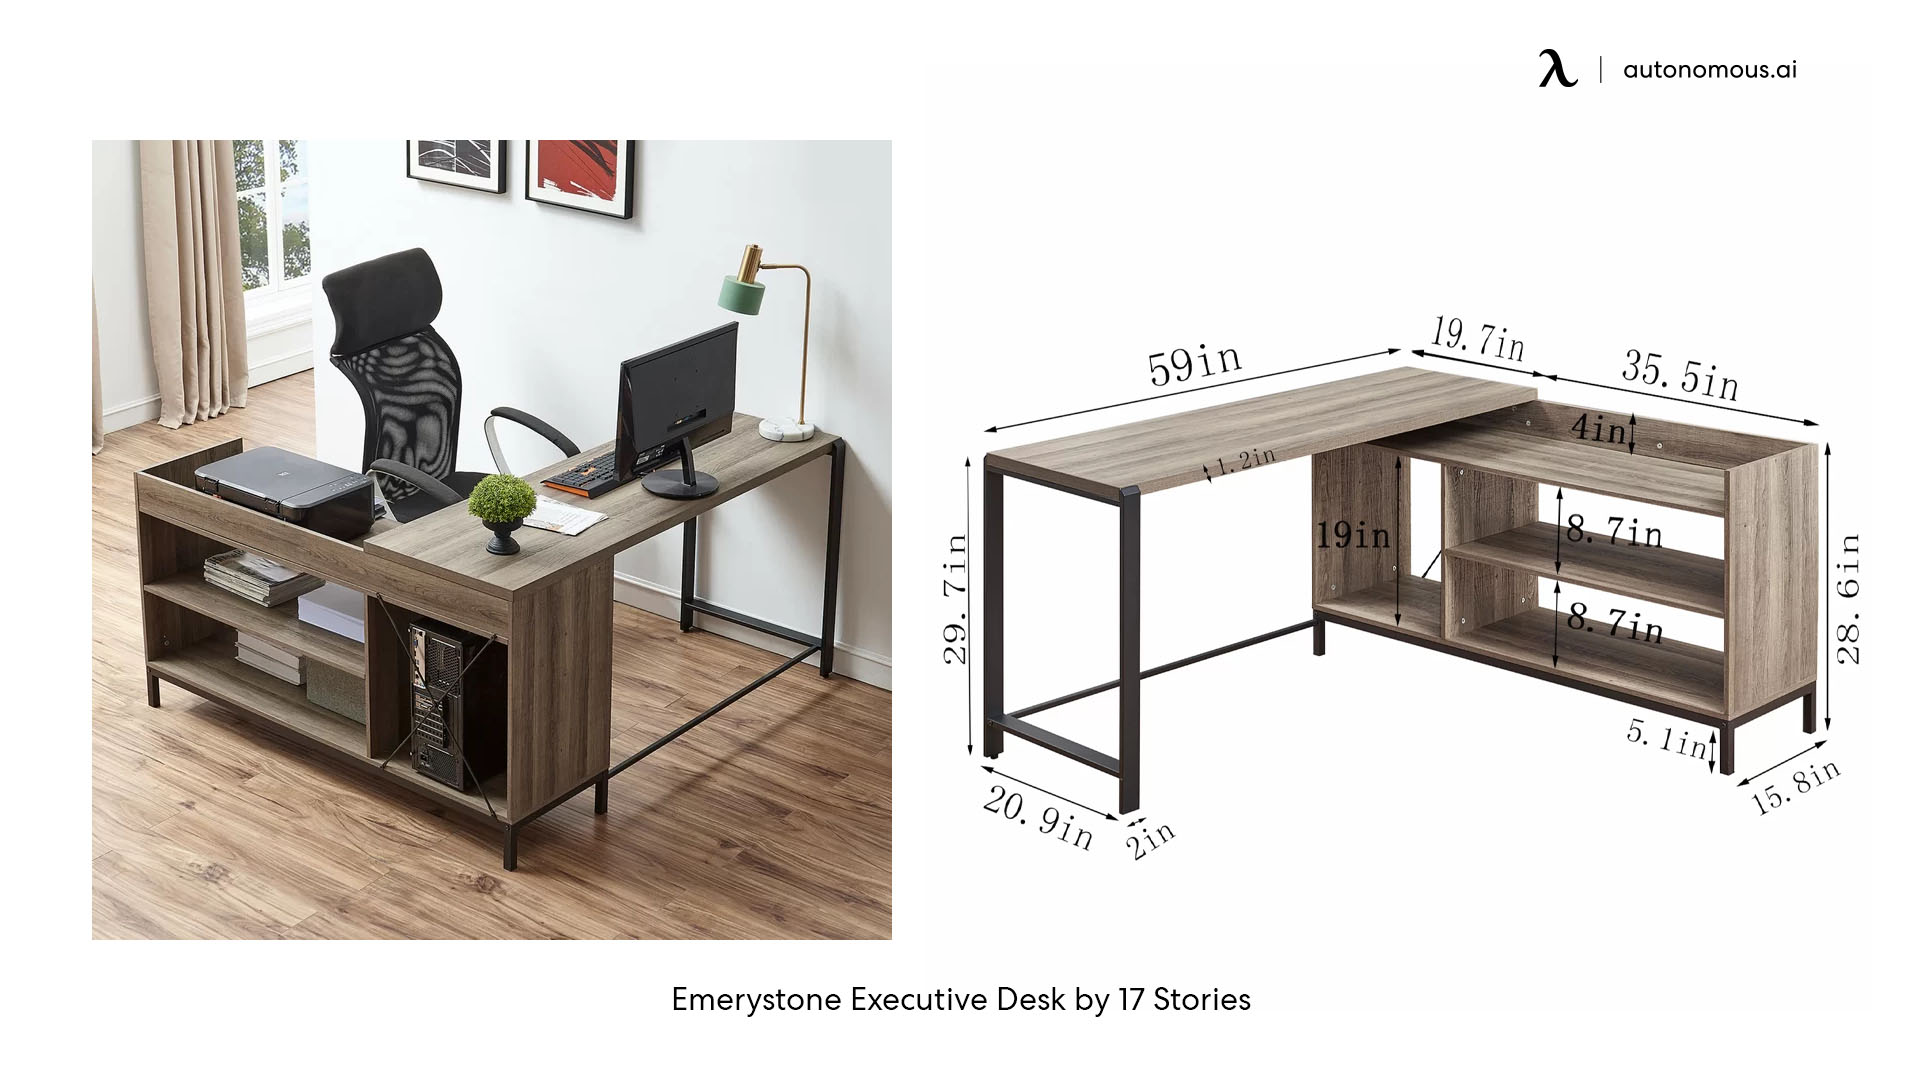 Emerystone Executive Desk by 17 Stories